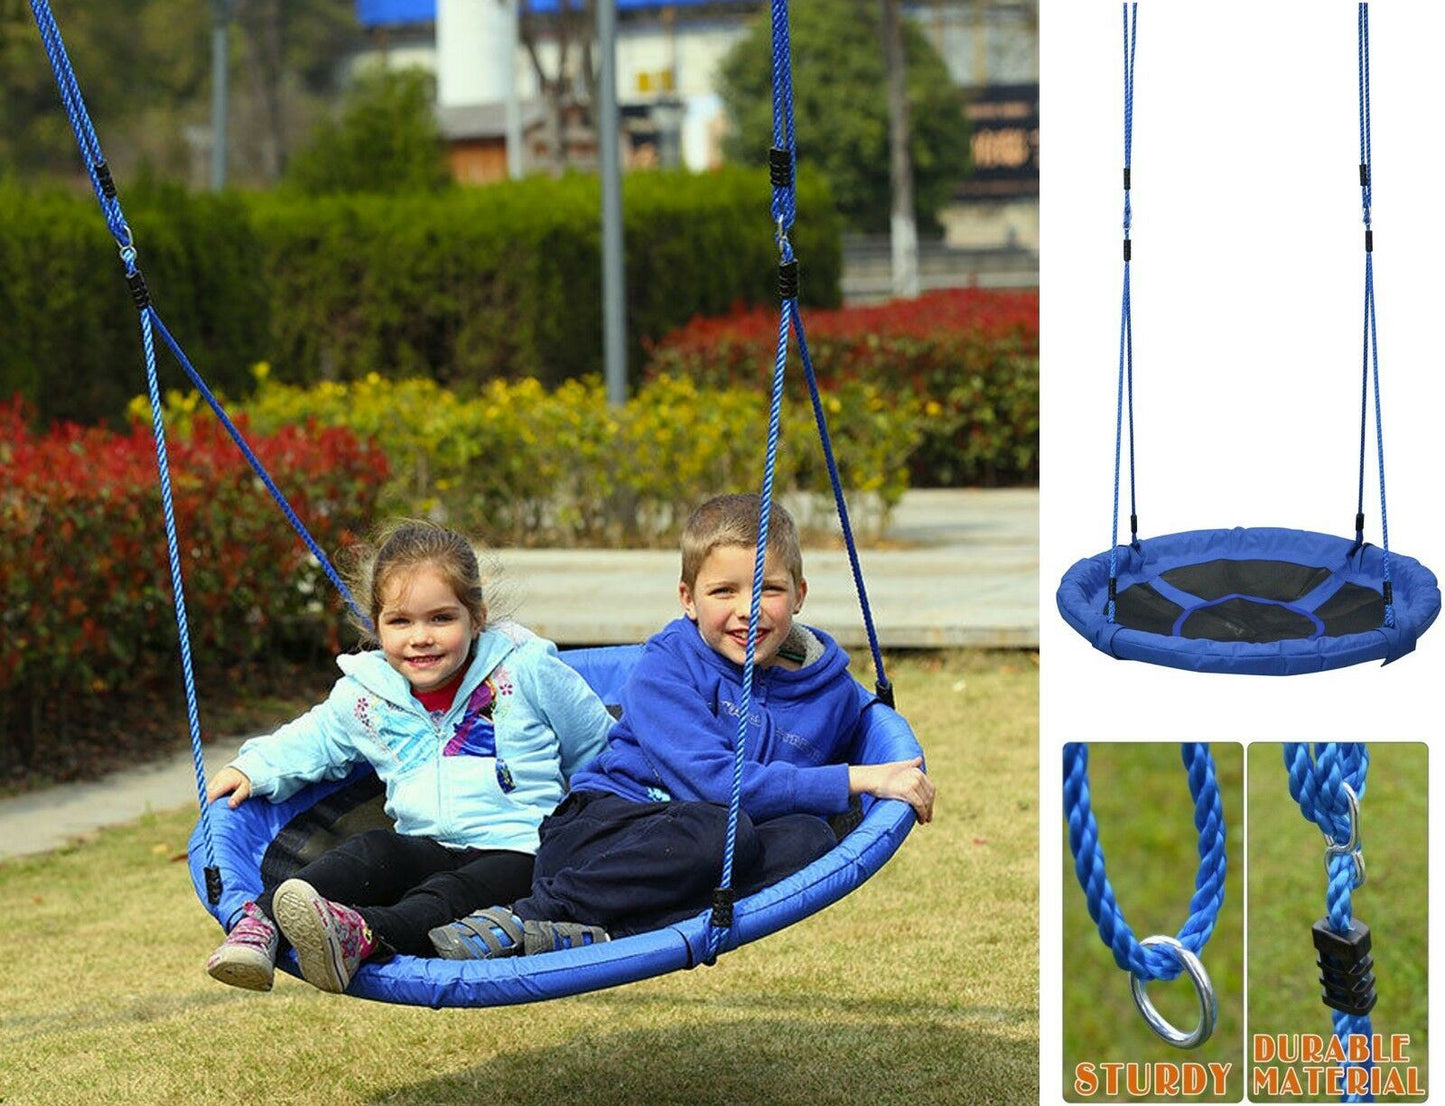 Large Nest Swing for 2 kids by The Magic Toy Shop - UKBuyZone